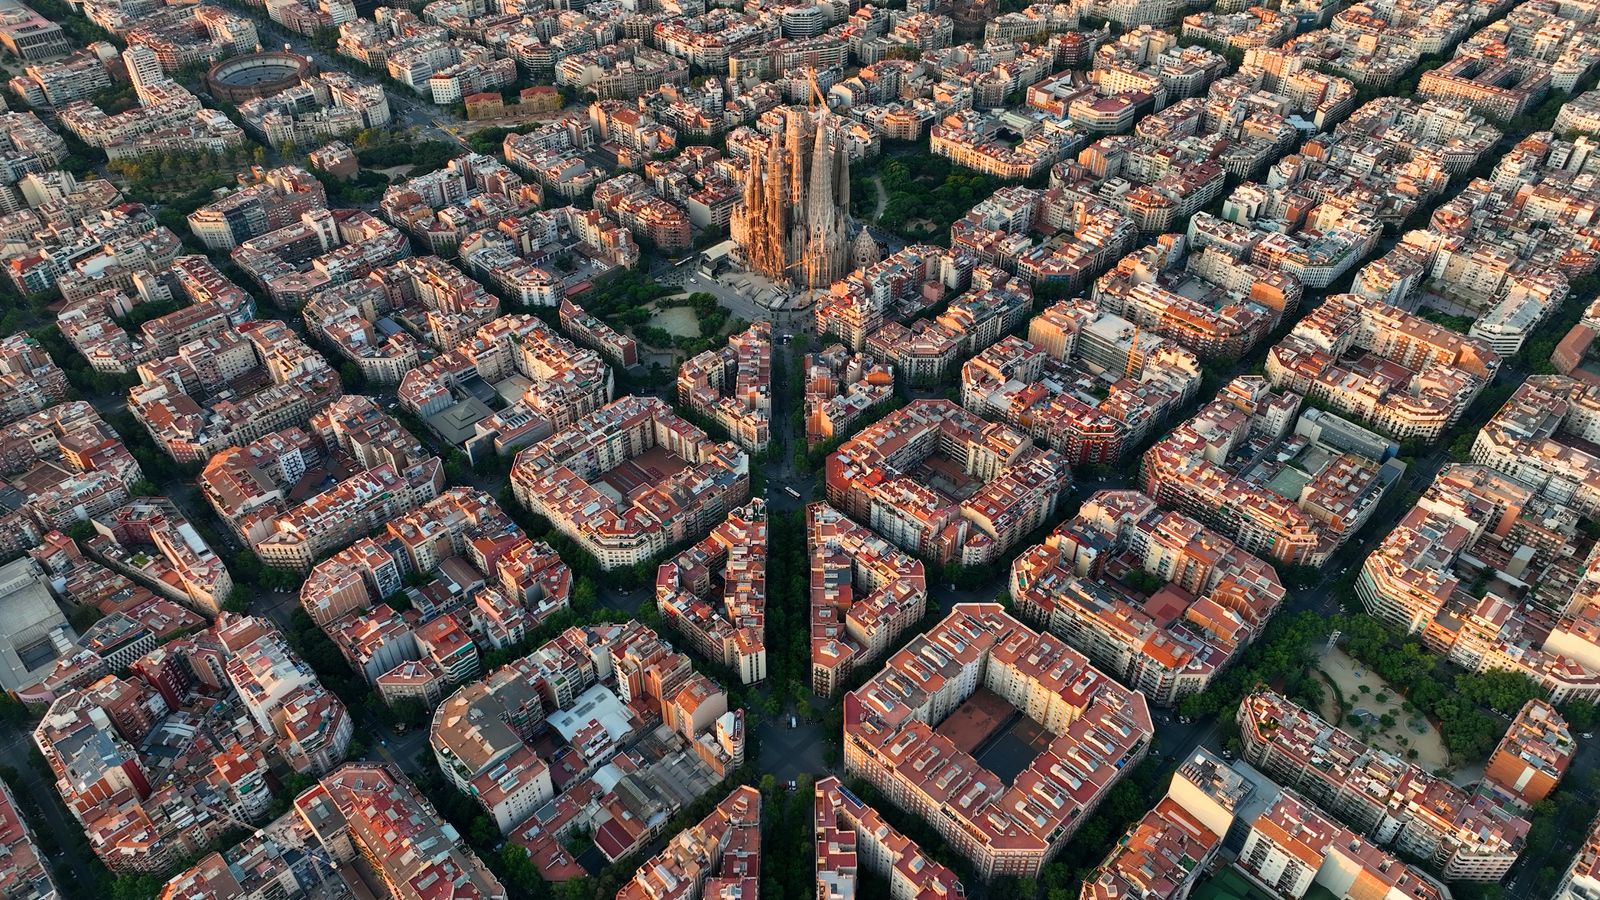 Barcelona's mayor vows to abolish short-term holiday lets by 2028